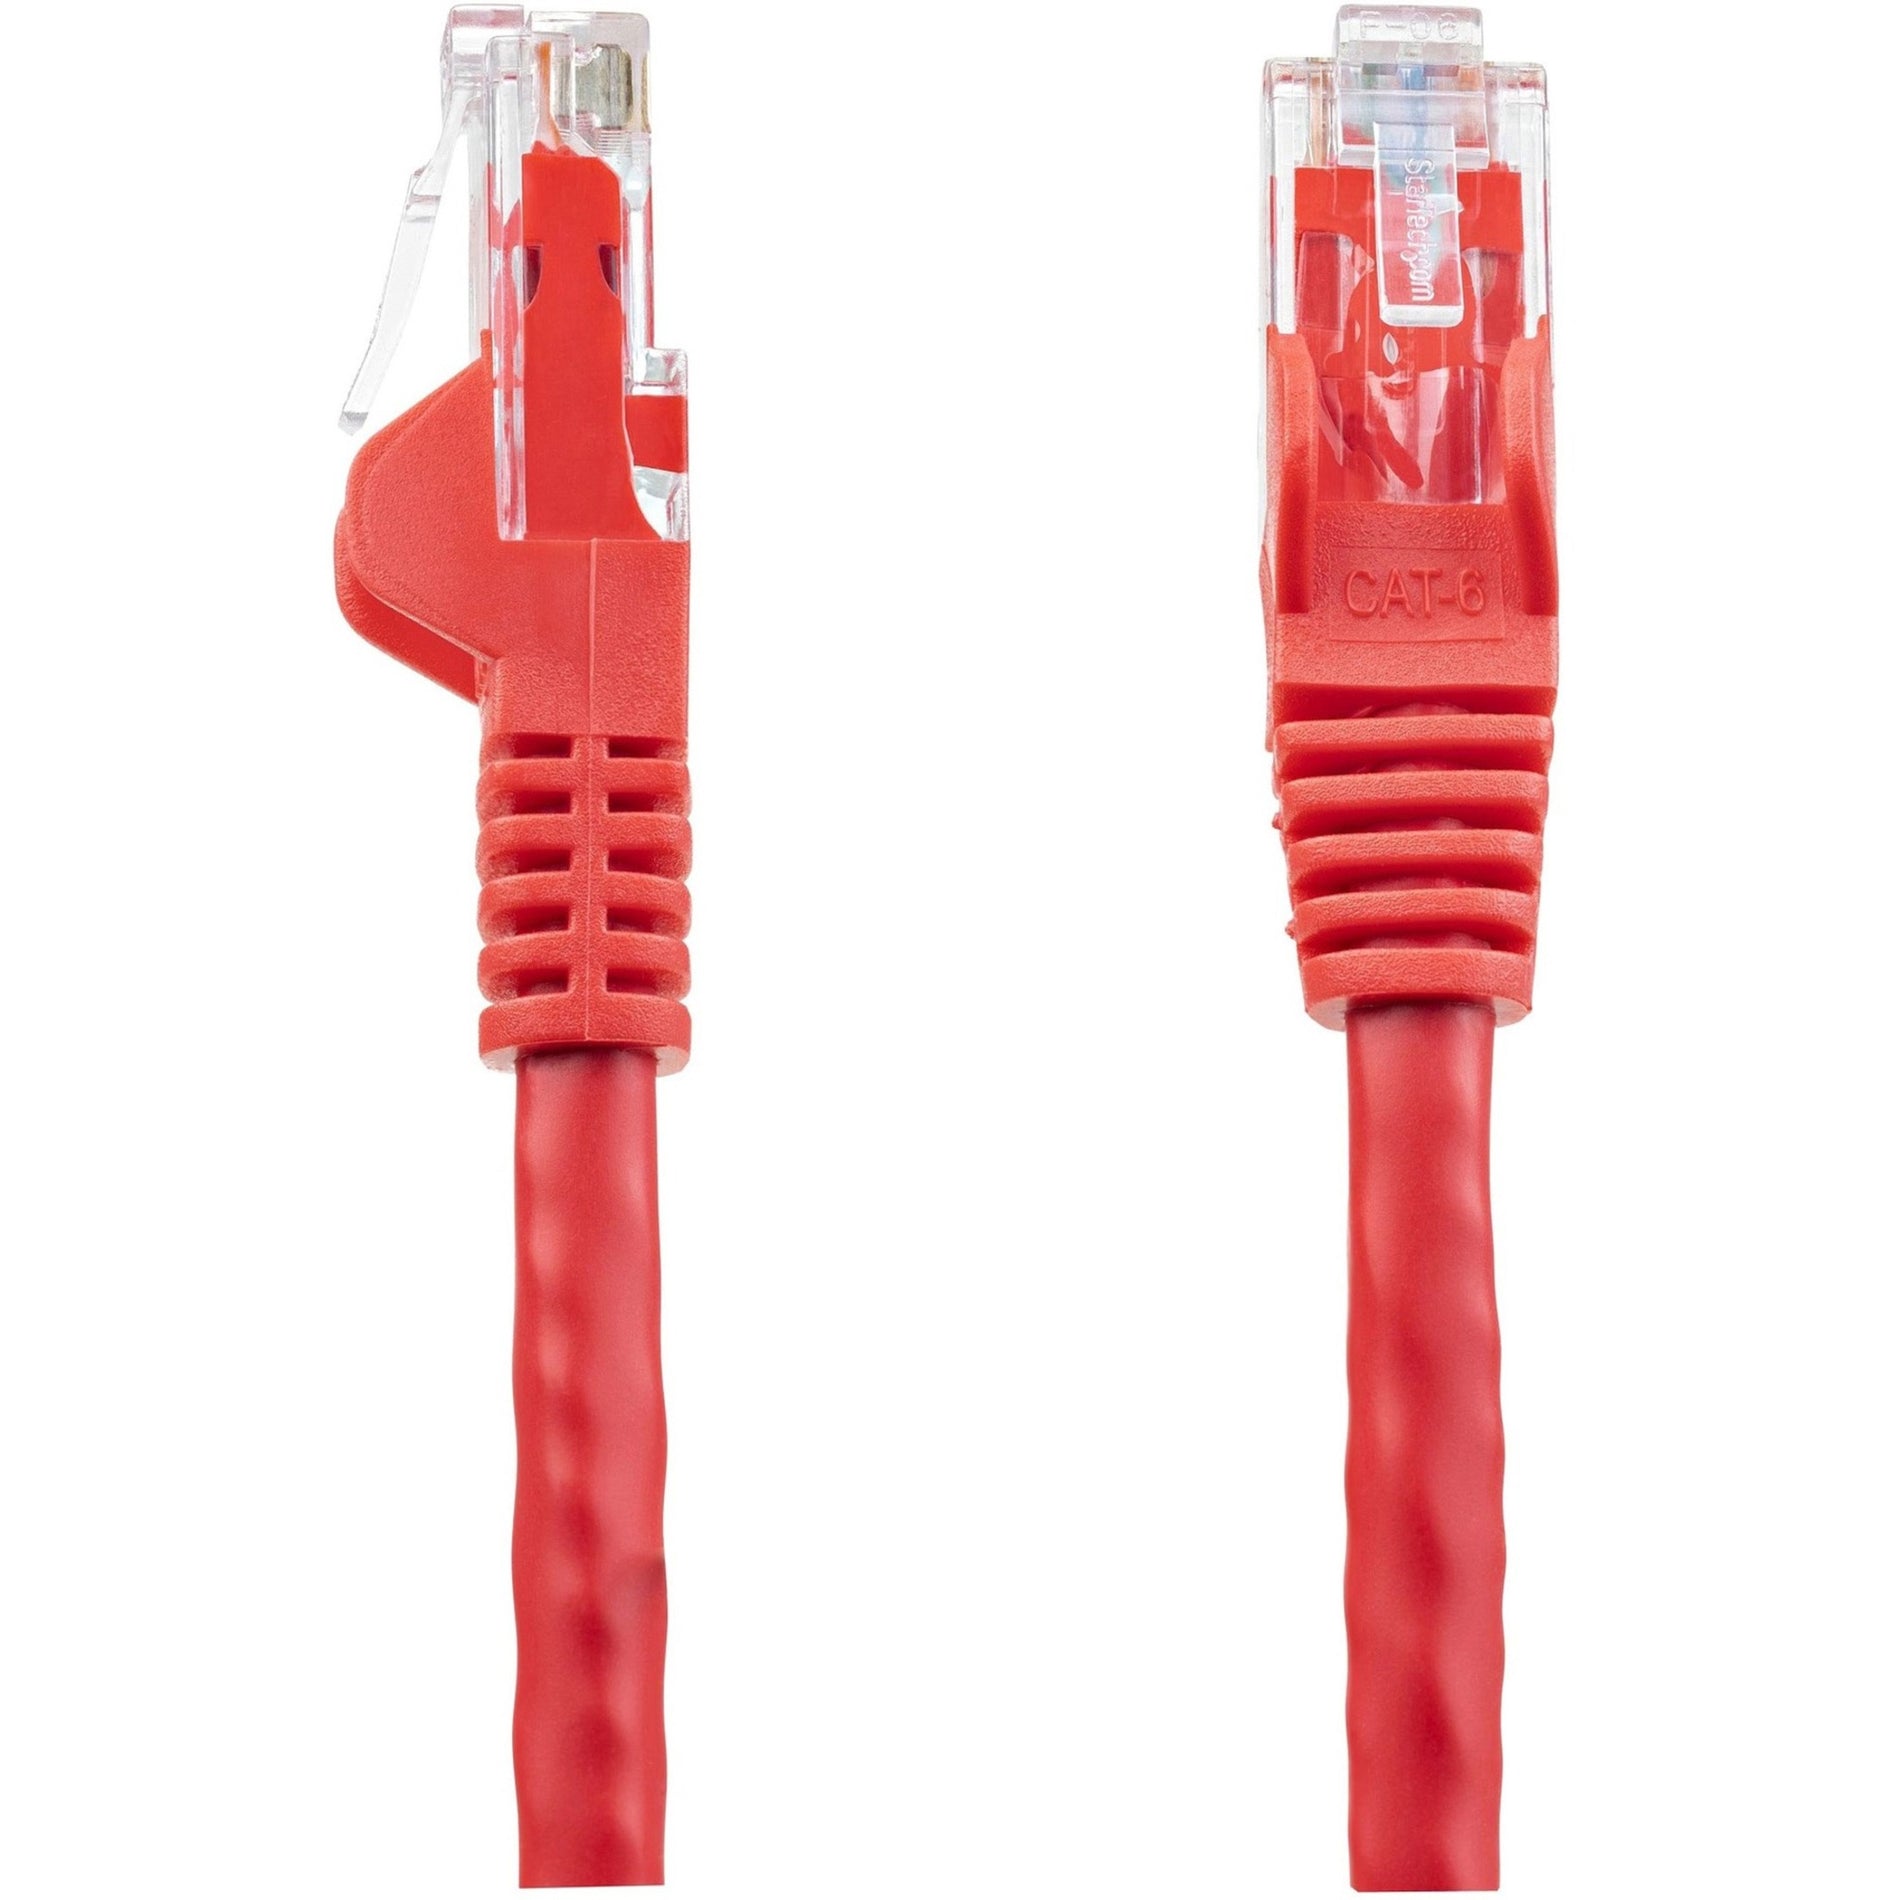 StarTech.com N6PATCH150RD Cat6 Patch Cable, 150ft Red Ethernet Cable, Snagless RJ45 Connectors